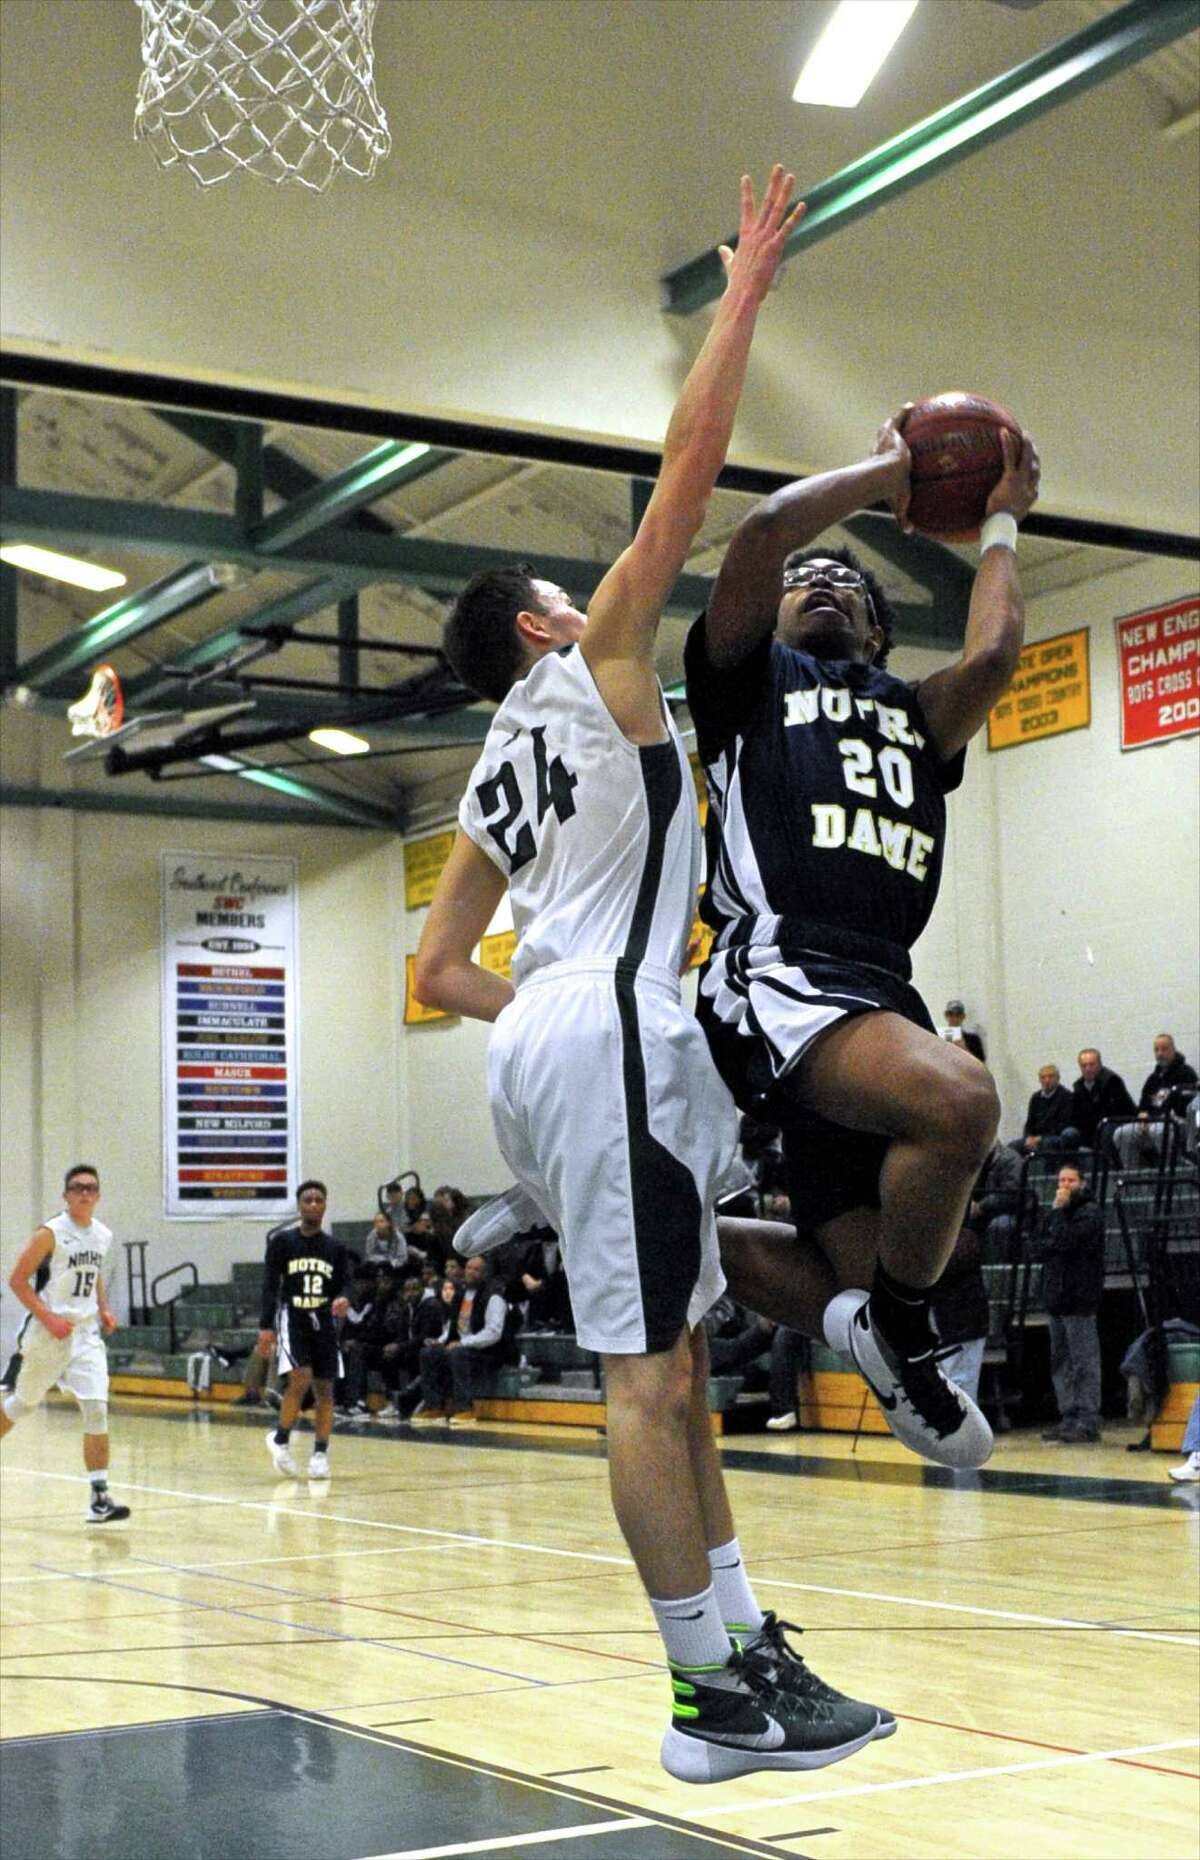 Notre Dame-Fairfield's Noreaga Davis (20) goes to the basket while New Milford's Reese Zimmerman (24) goes up for the block in the boys basketball game between Notre Dame-Fairfield and New Milford high schools on Friday night, February 19, 2016, at New Milford High School, in New Milford, Conn.